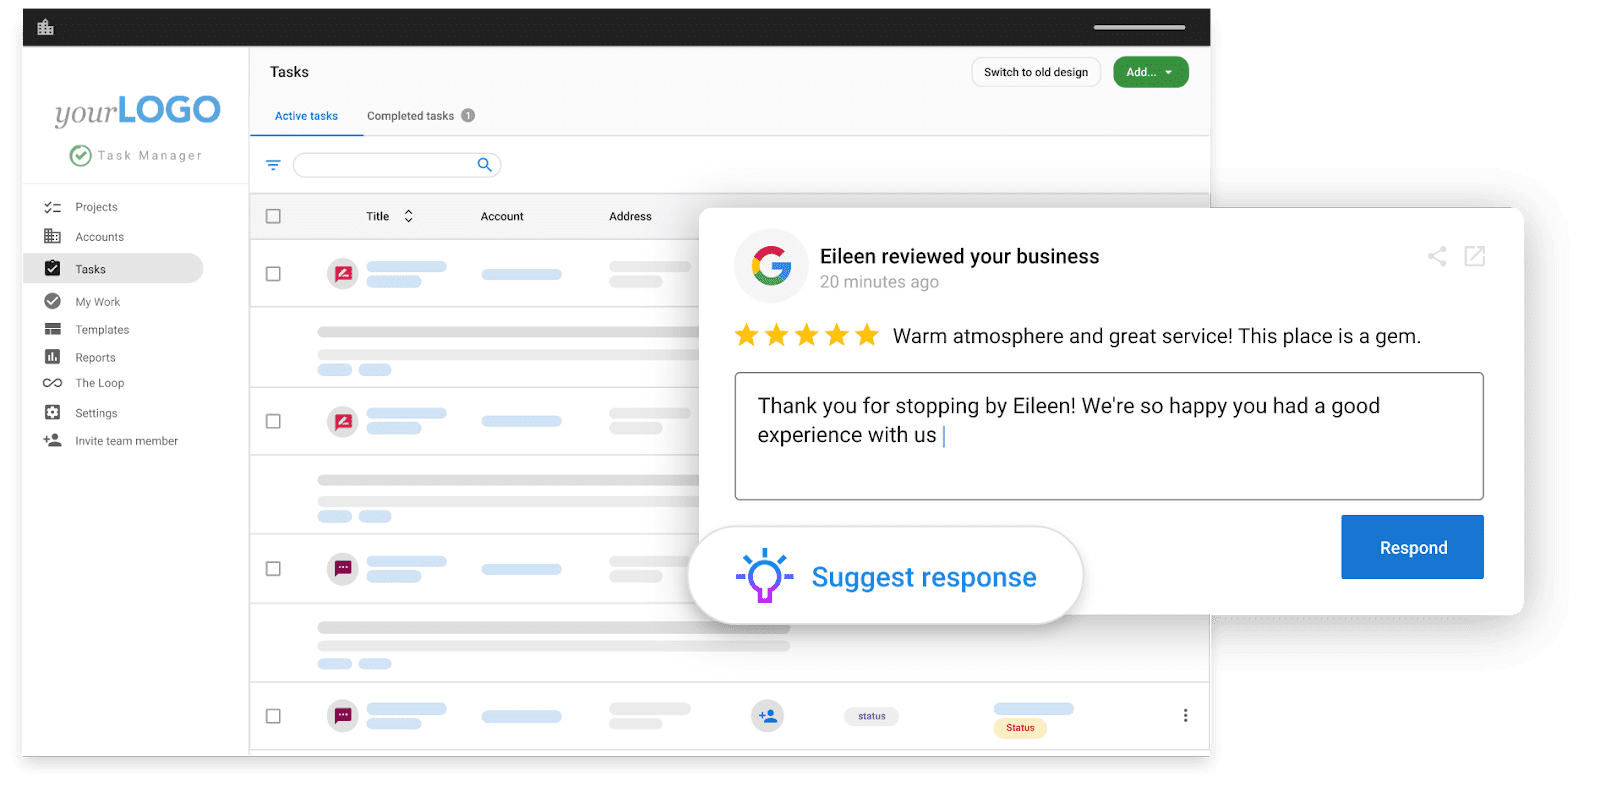 Reputation management includes AI assist for review responses.